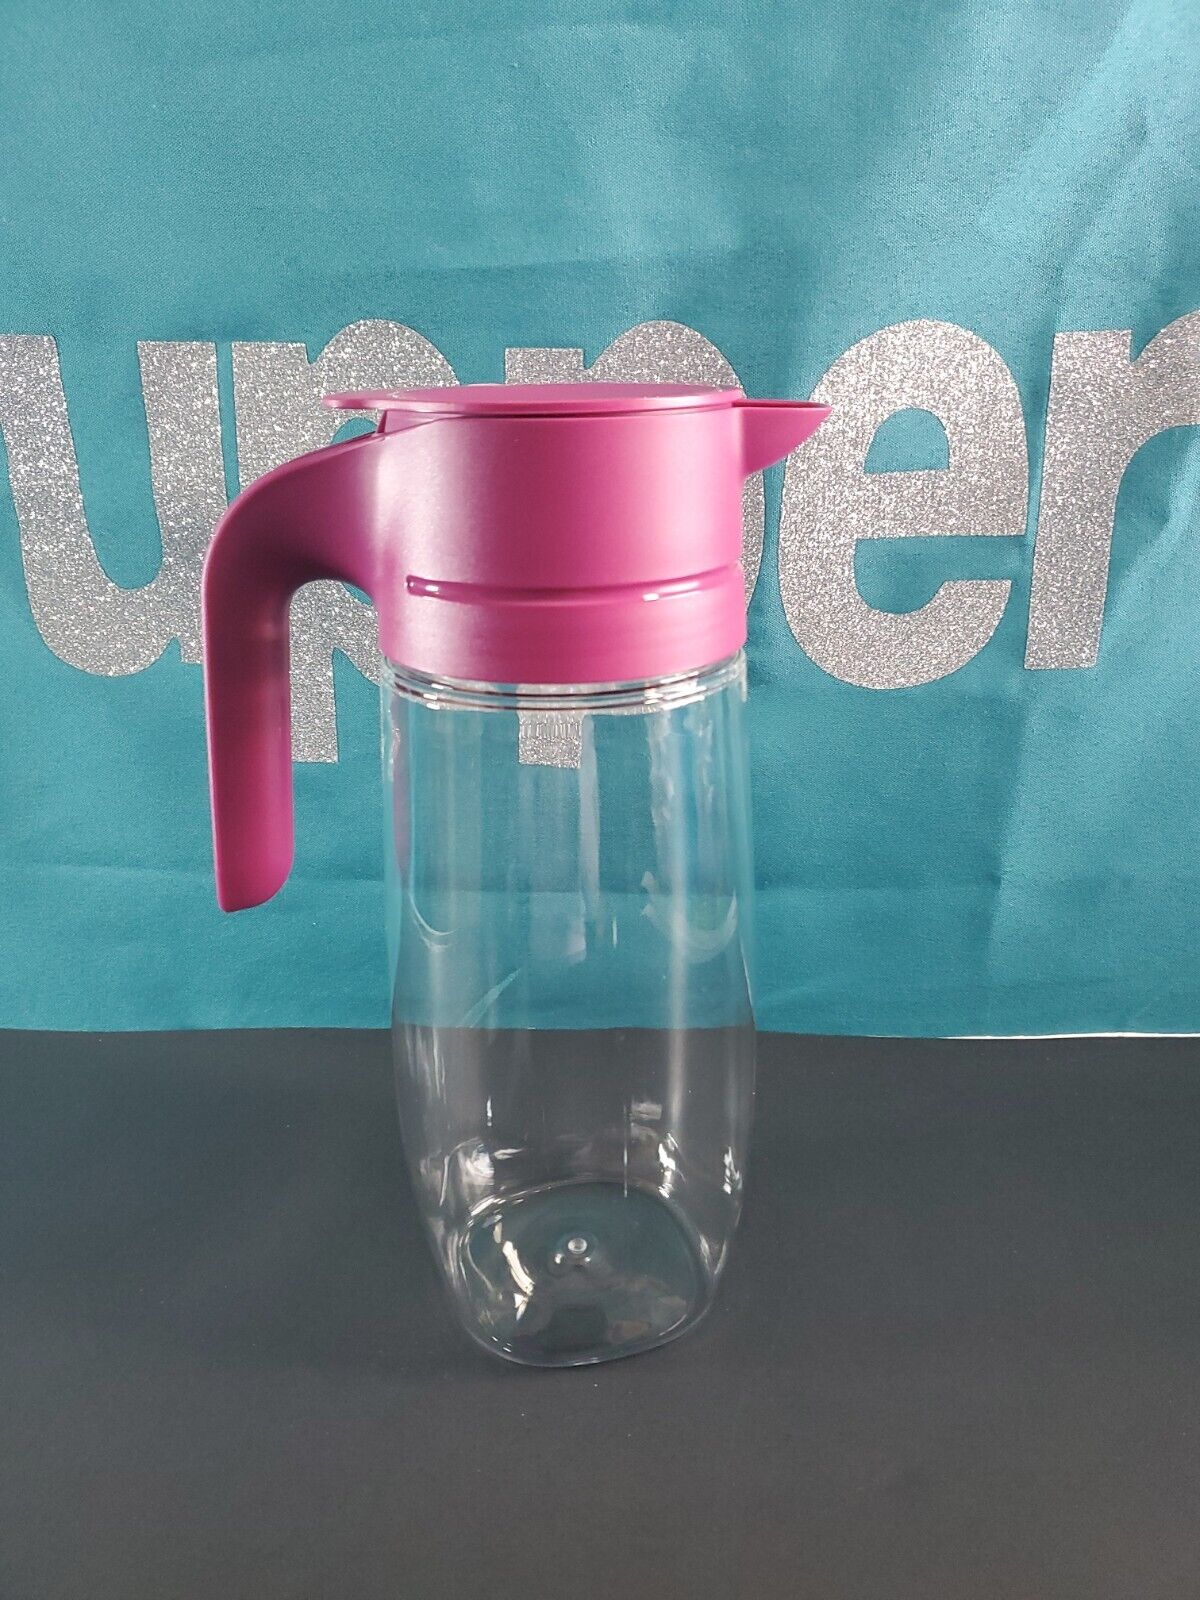 Tupperware Clearly Elegant Acrylic Pitcher 1.7L / 7.25 Cup Dark Pink & Sheer .